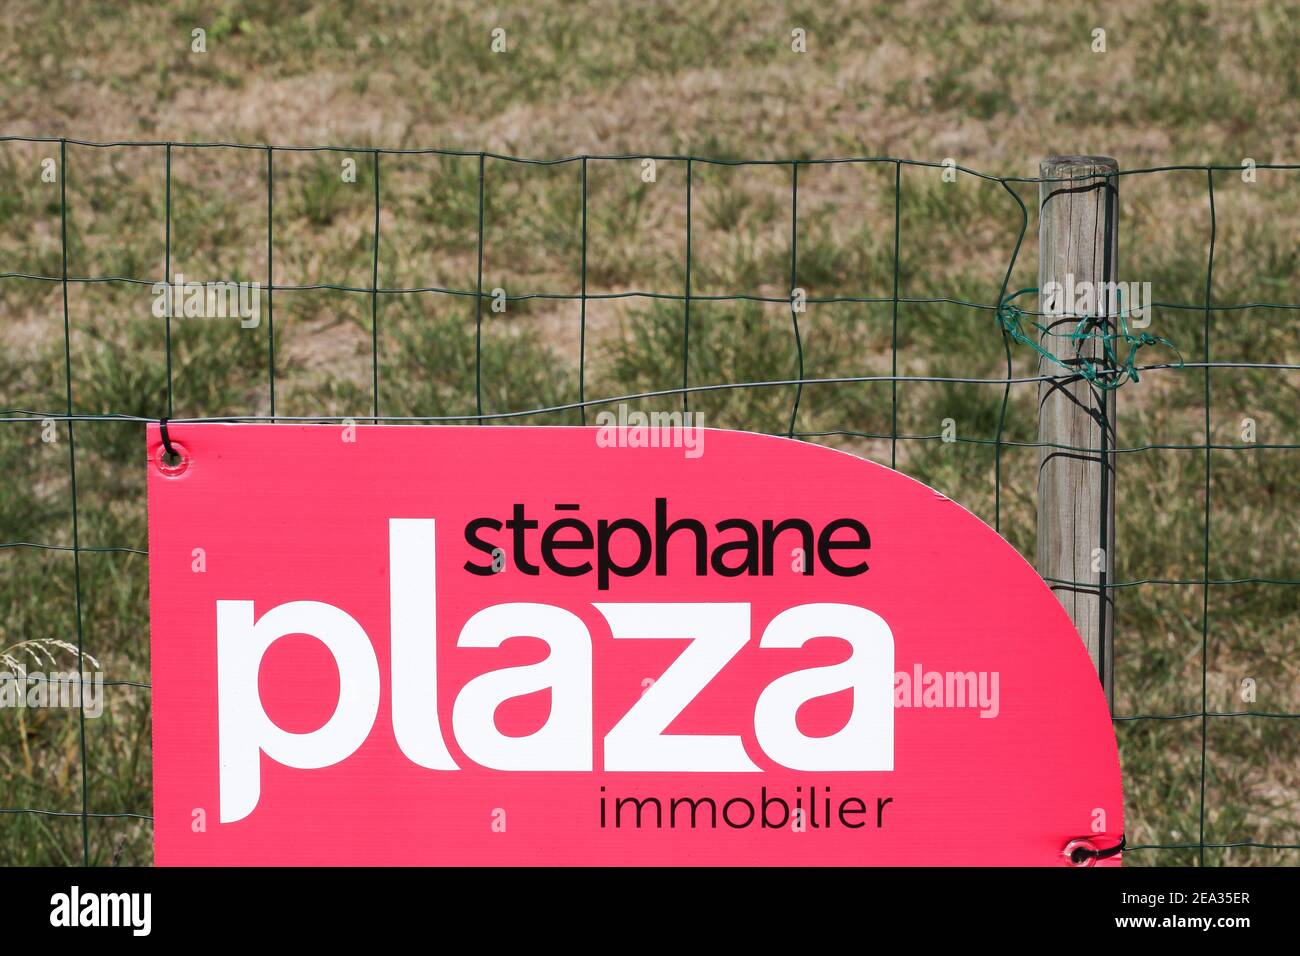 La Clayette, France - September 12, 2020: Stephane Plaza logo on a fence. Stephane Plaza Immobilier is a French network of real estate agencies Stock Photo